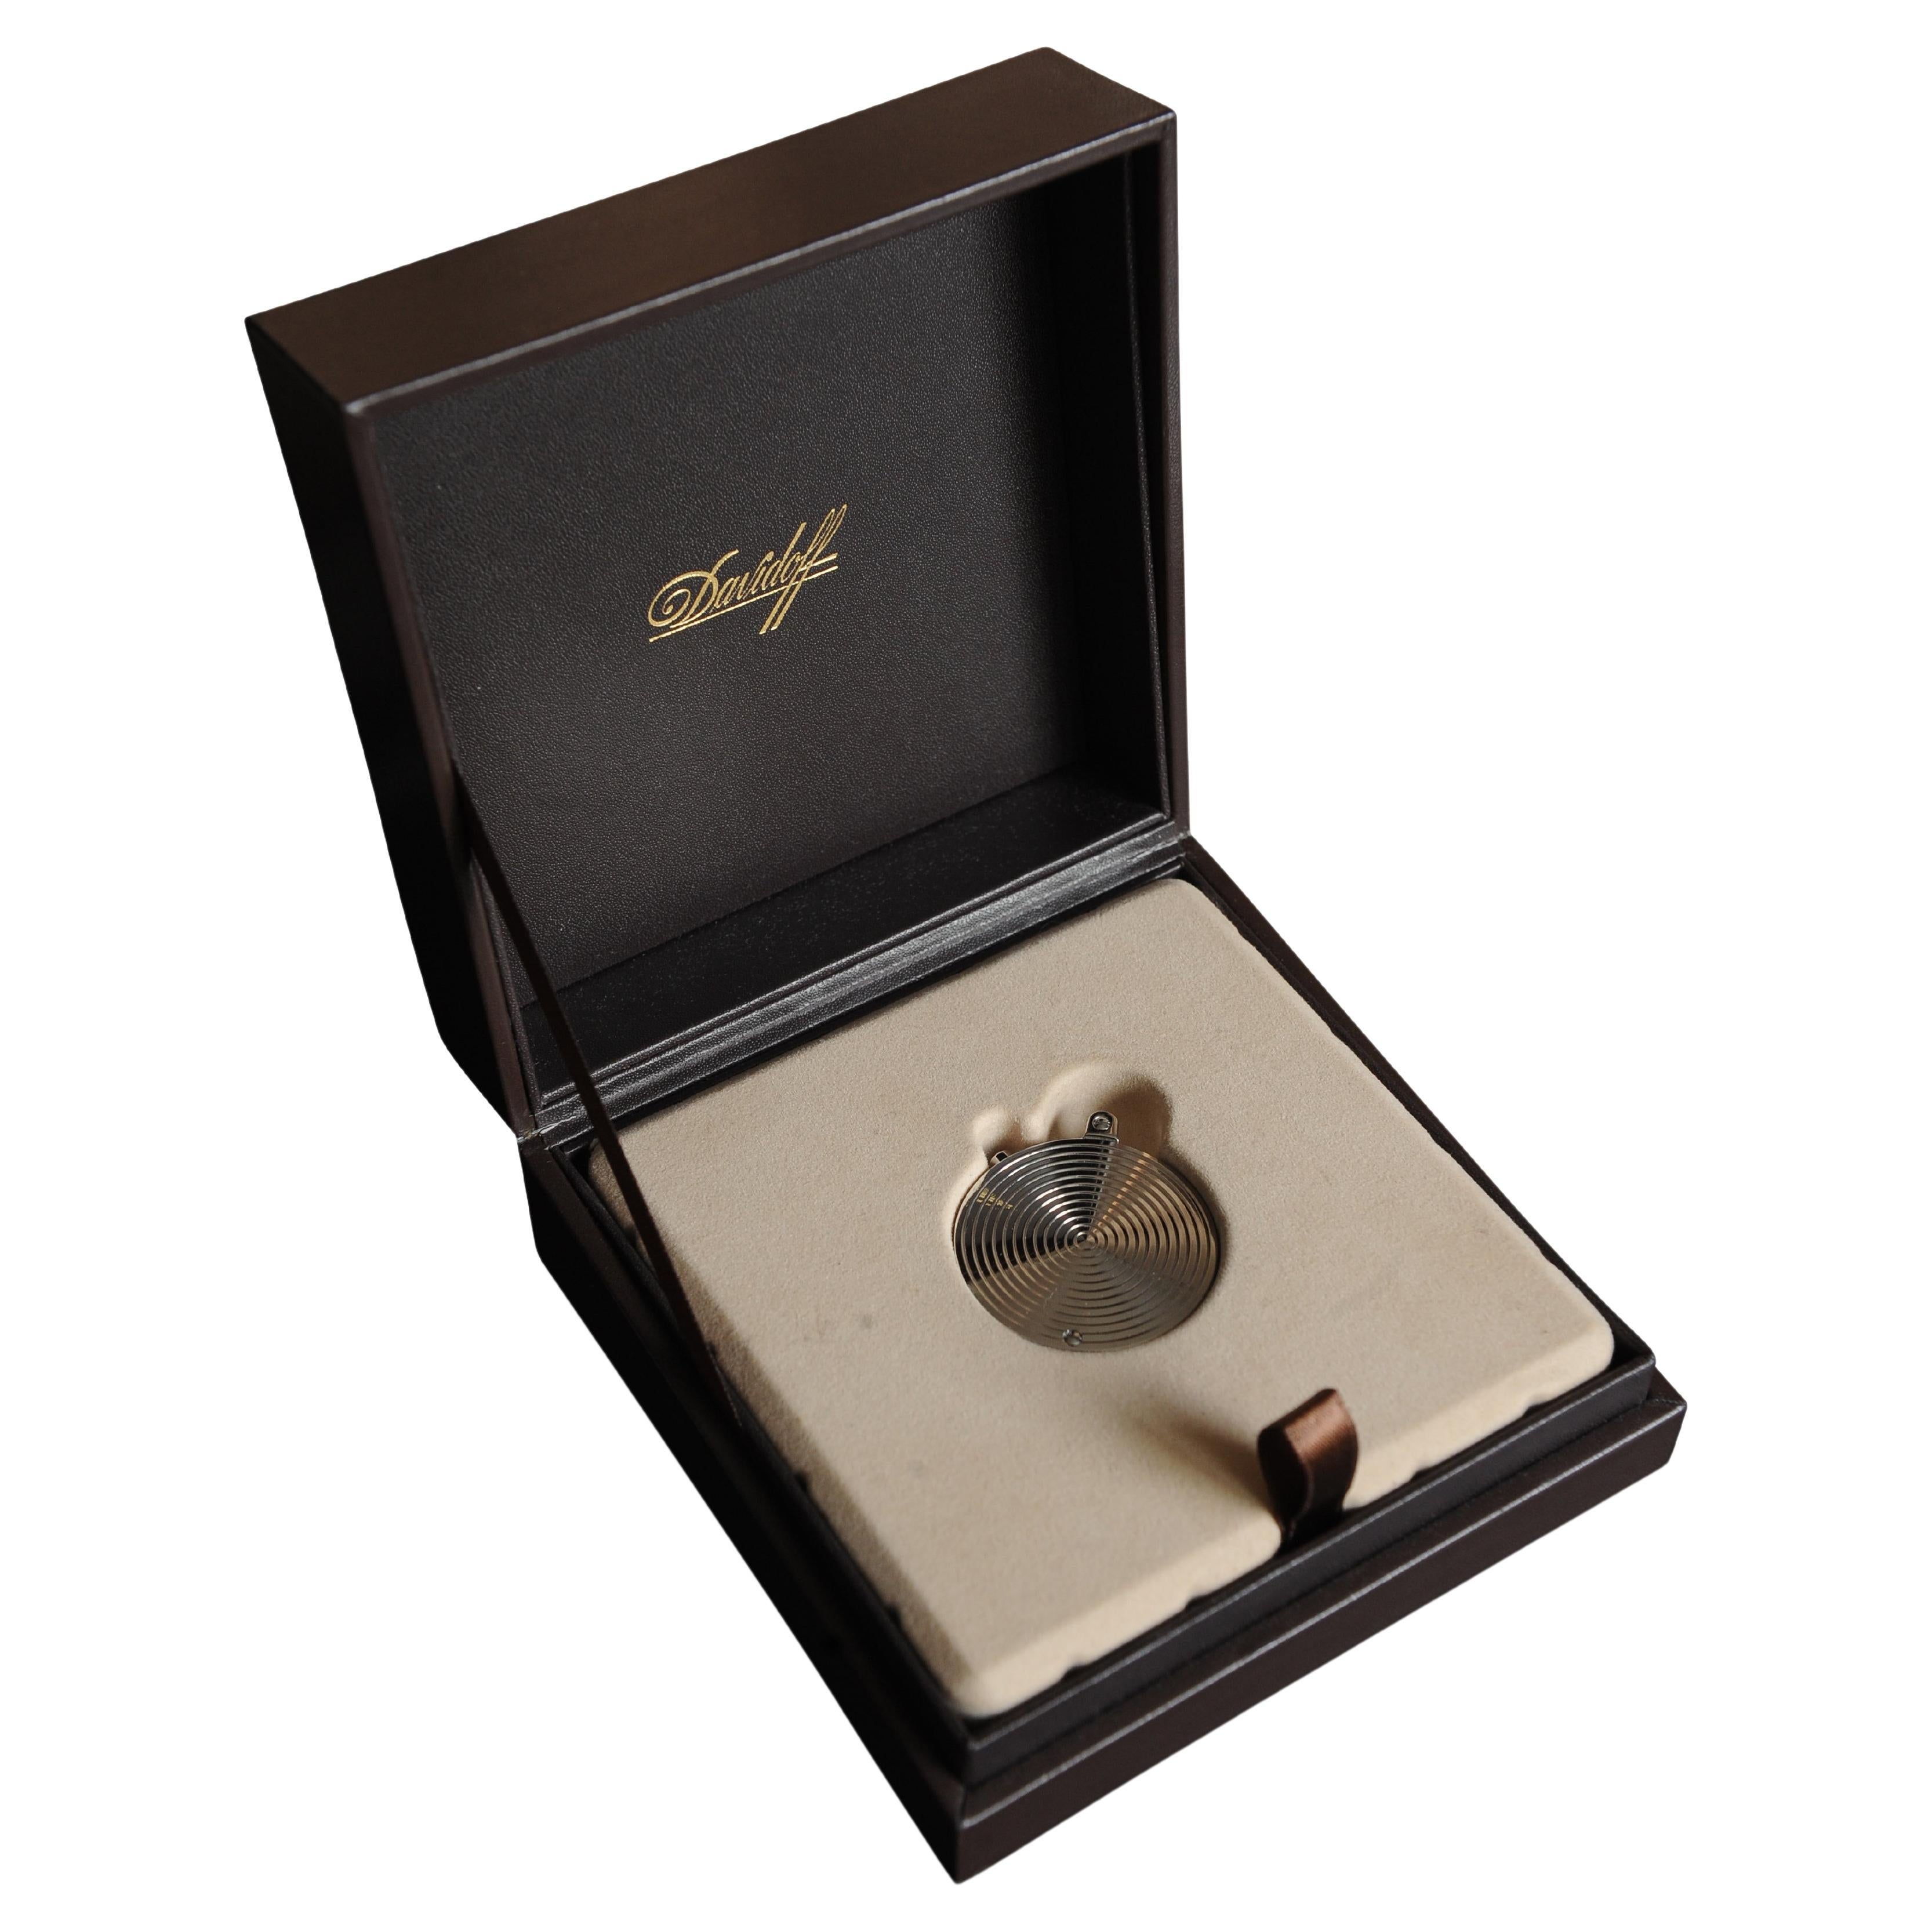 Davidoff Steel Circular Cigar Punch Cutter with Original Paper & Box Made in Germany 

Carry a trio of cigar punches in your pocket, in no more space than is taken up by a pocketwatch. This round stainless steel case from Davidoff features three